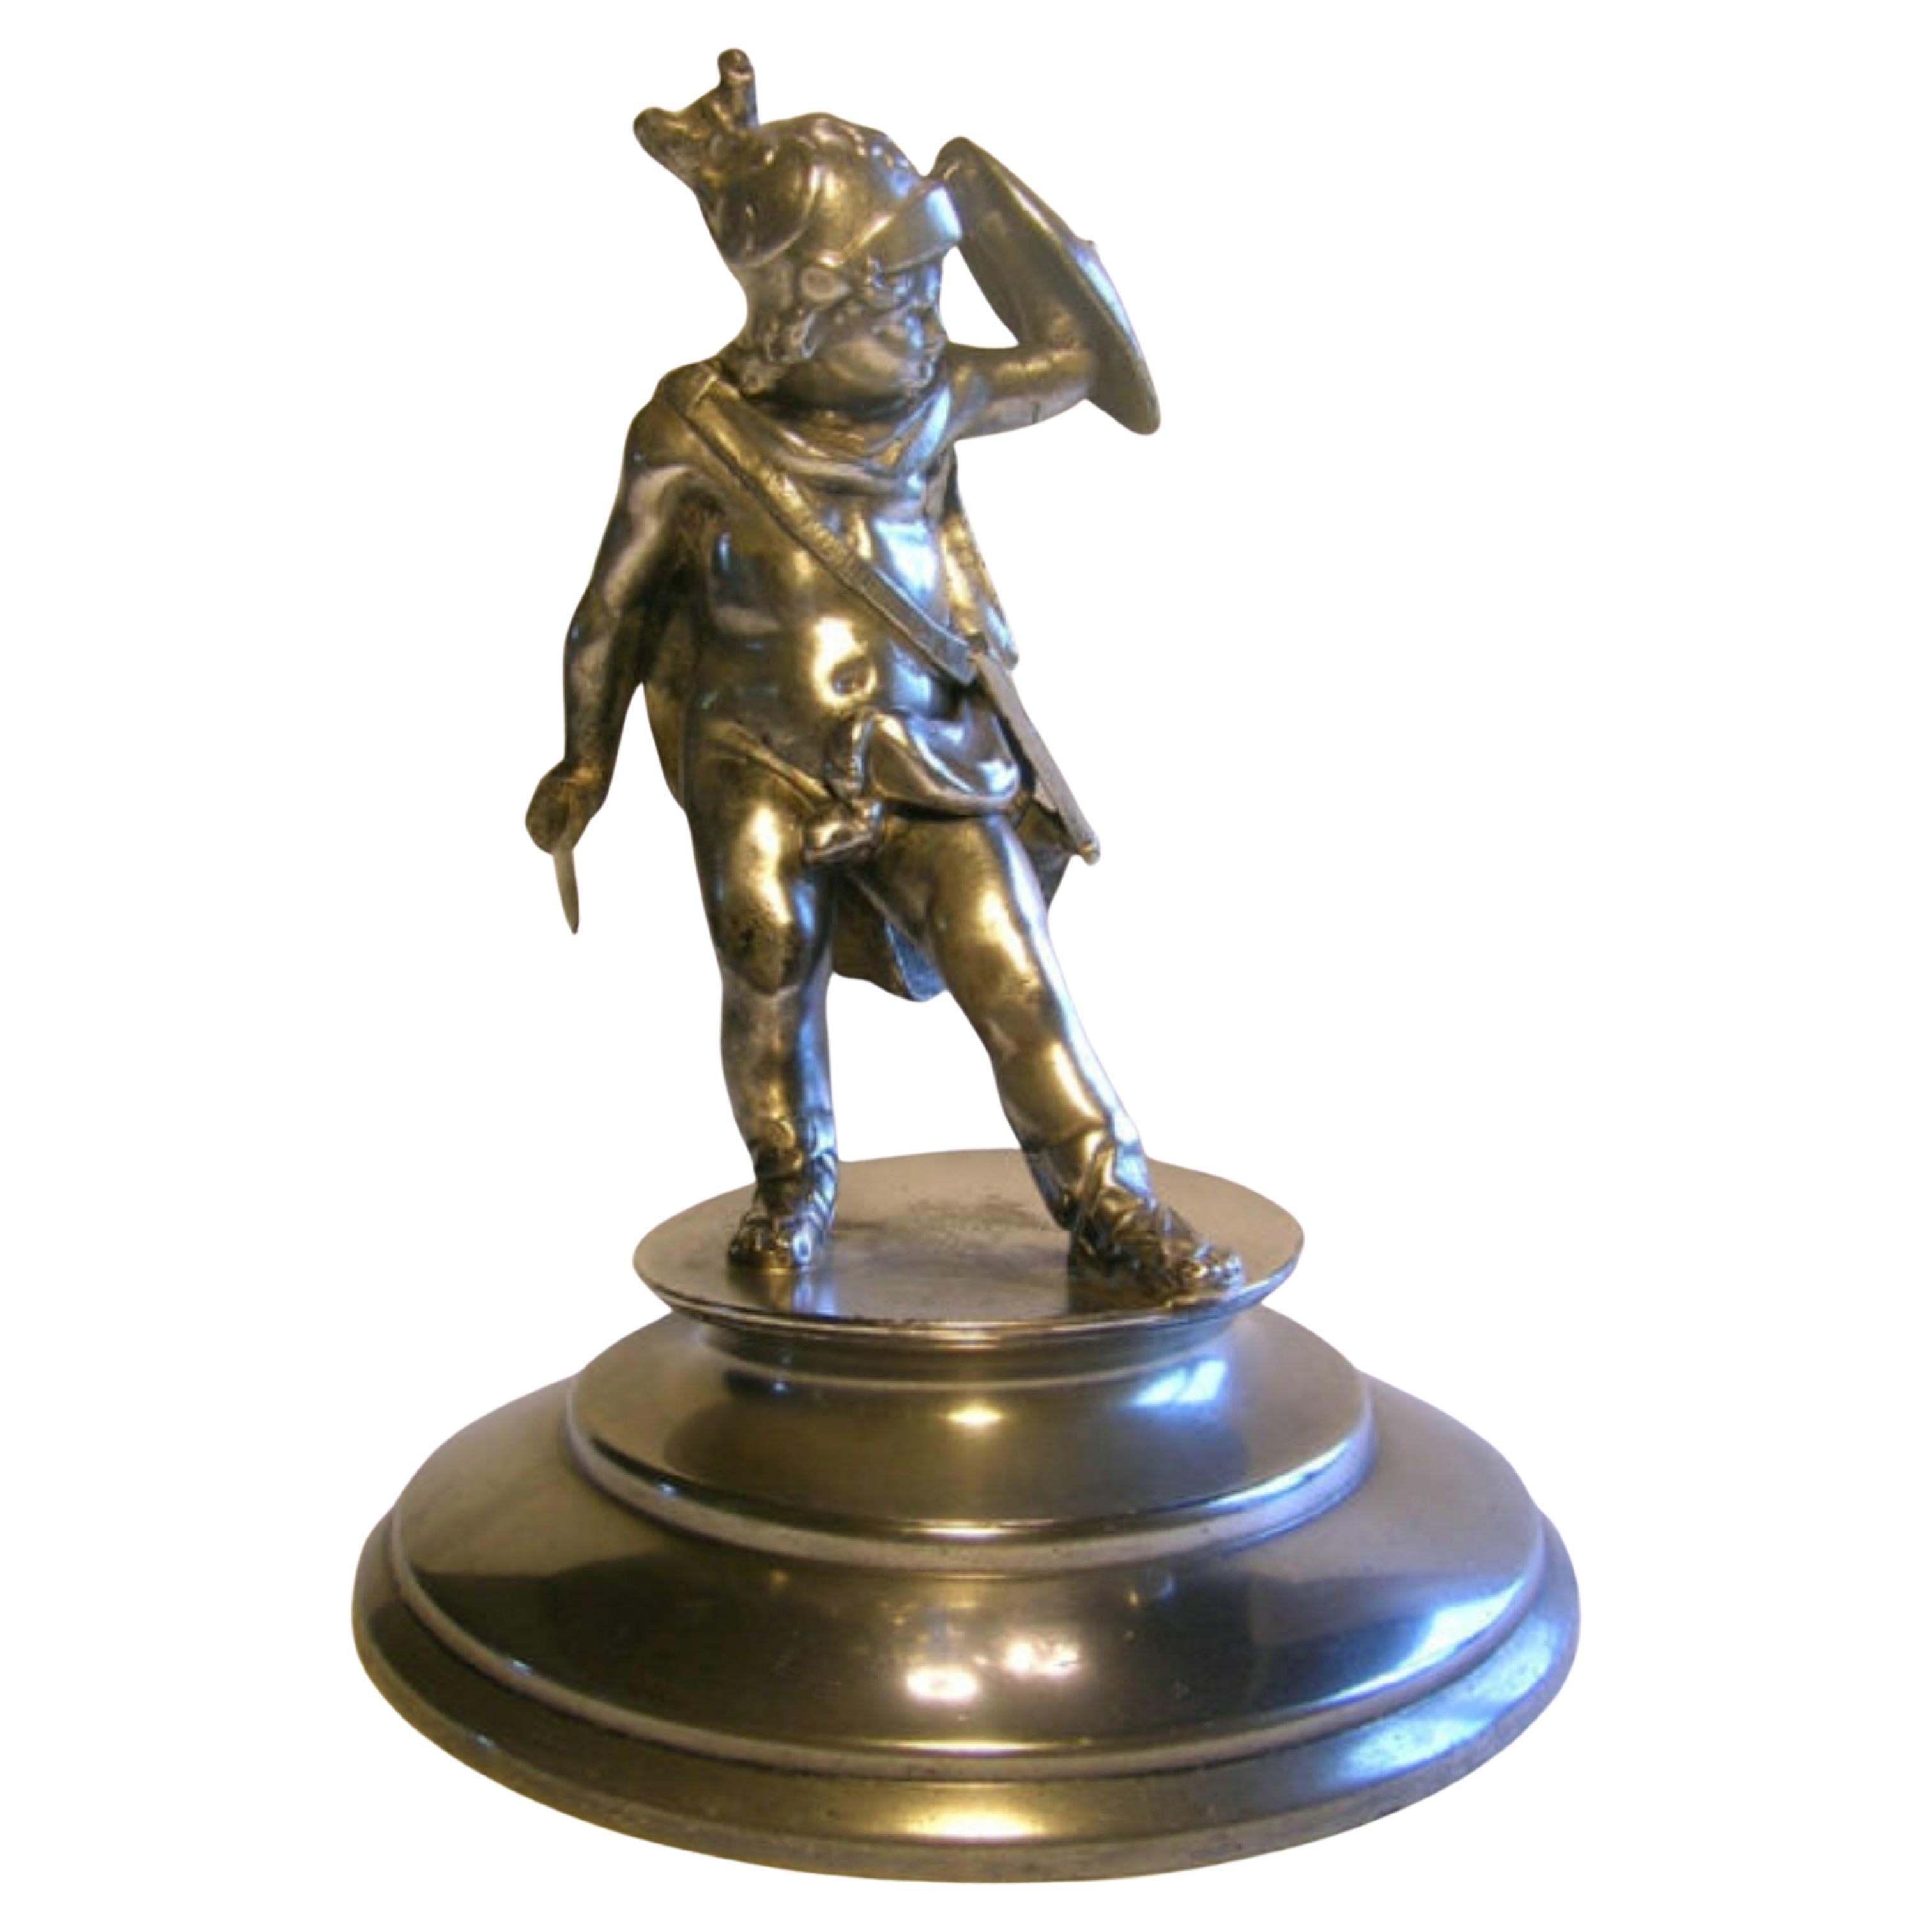 MIDDLETOWN PLATE CO. - Antique Neoclassical Warrior Statue - U.S. - Late 19th C.